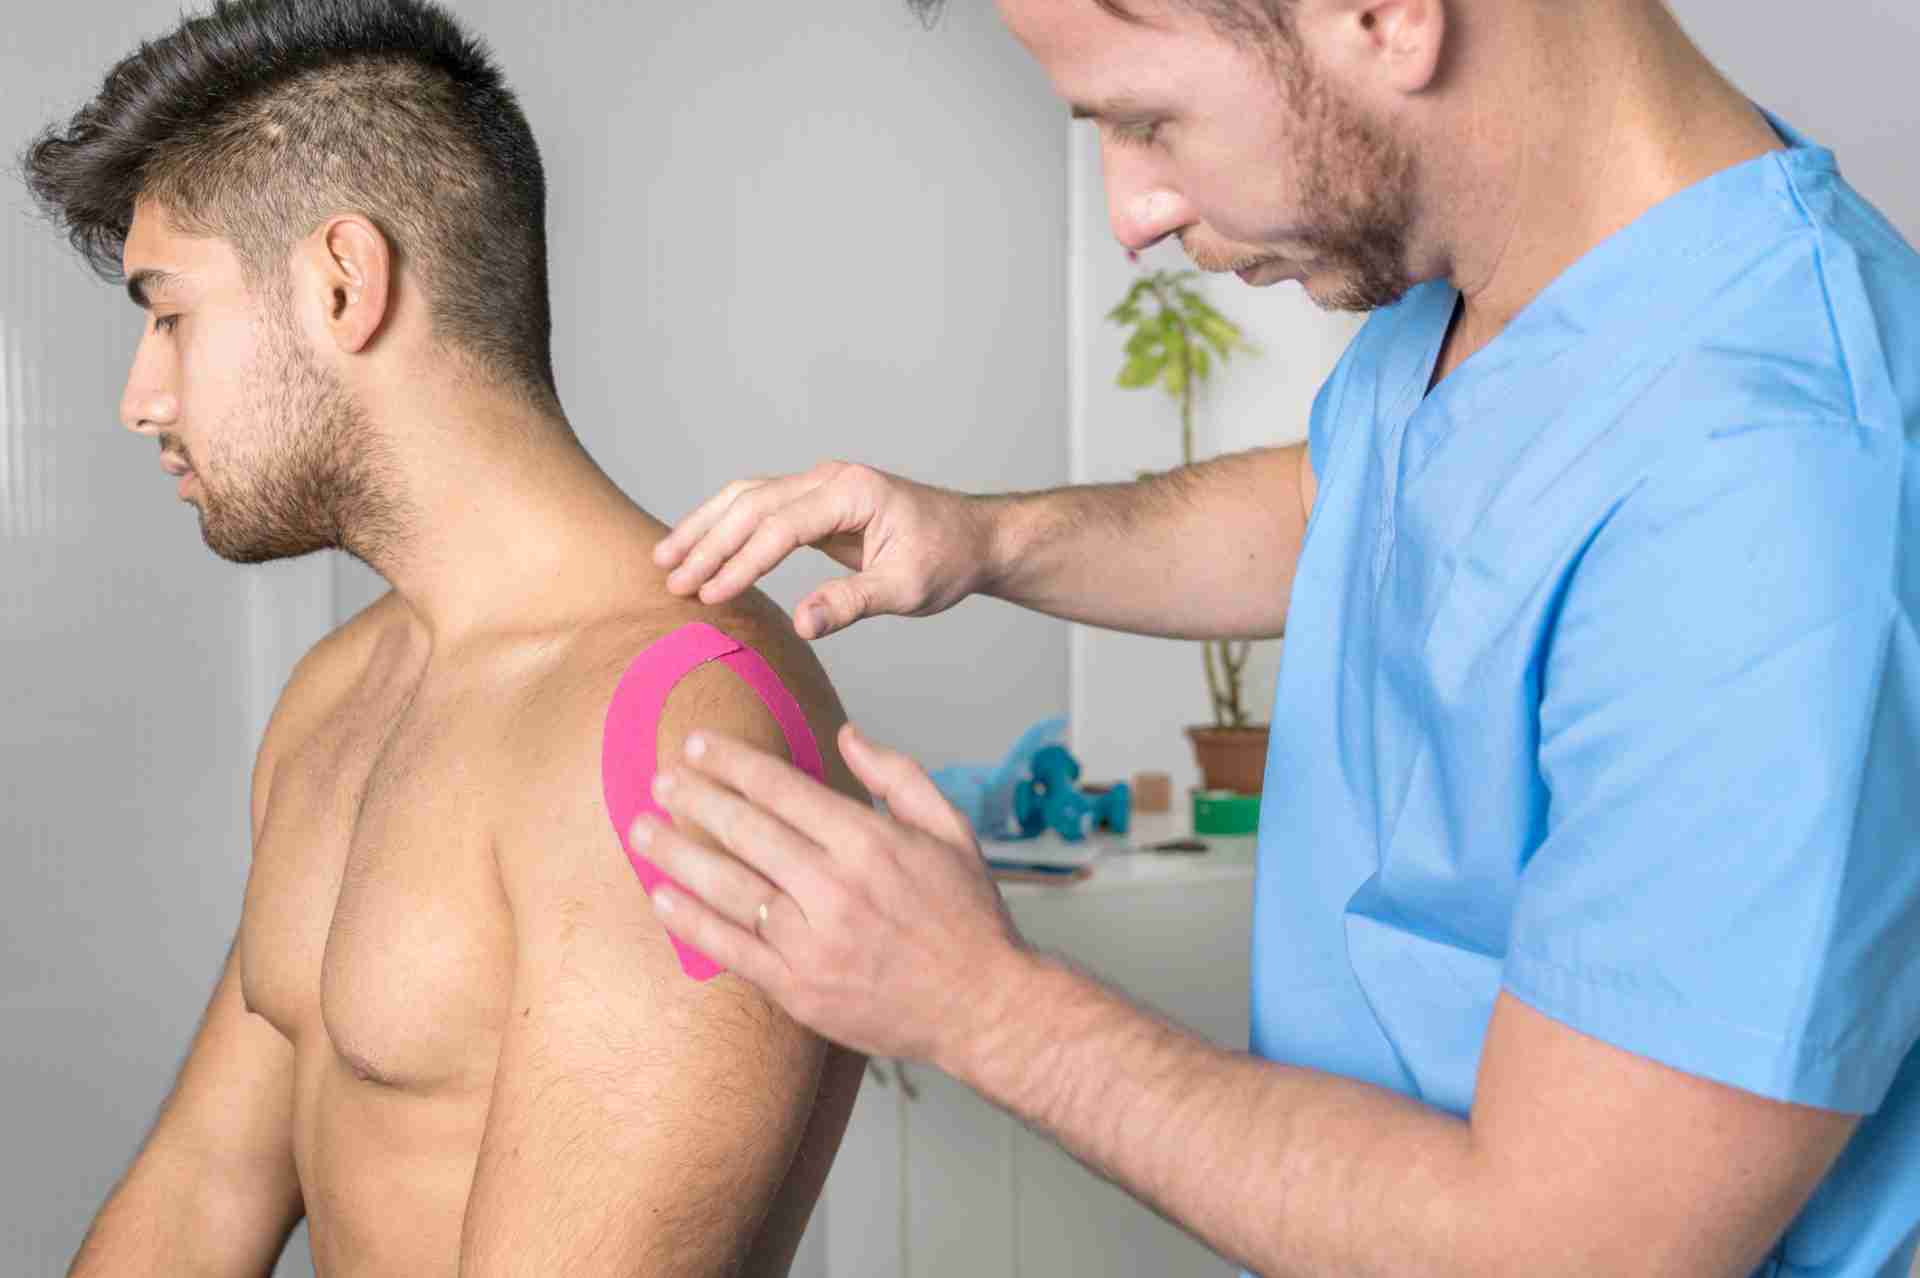 Physical therapist applying kinesiology tape to male patient's shoulder